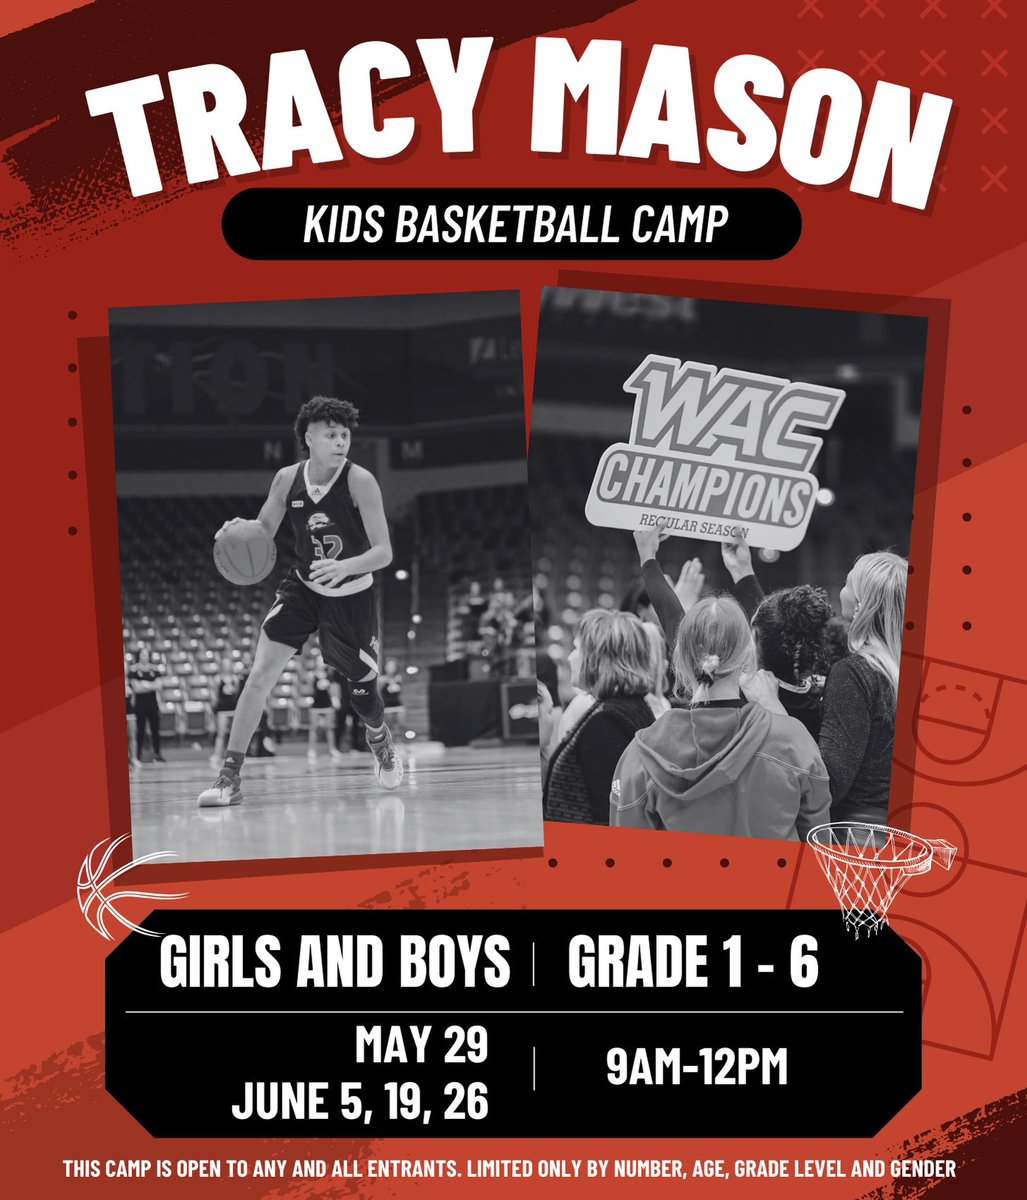 It’s TIME TBird Nation! Registration is OPEN and it’s time to REGISTER for Kids Camp! Come join us this summer and don’t miss out on the fun! 🏀⚡️⛰️ LINK IN BIO - Register Today! #BackToBusiness⚡️#TBirdNation⚡️#RaiseTheHammer